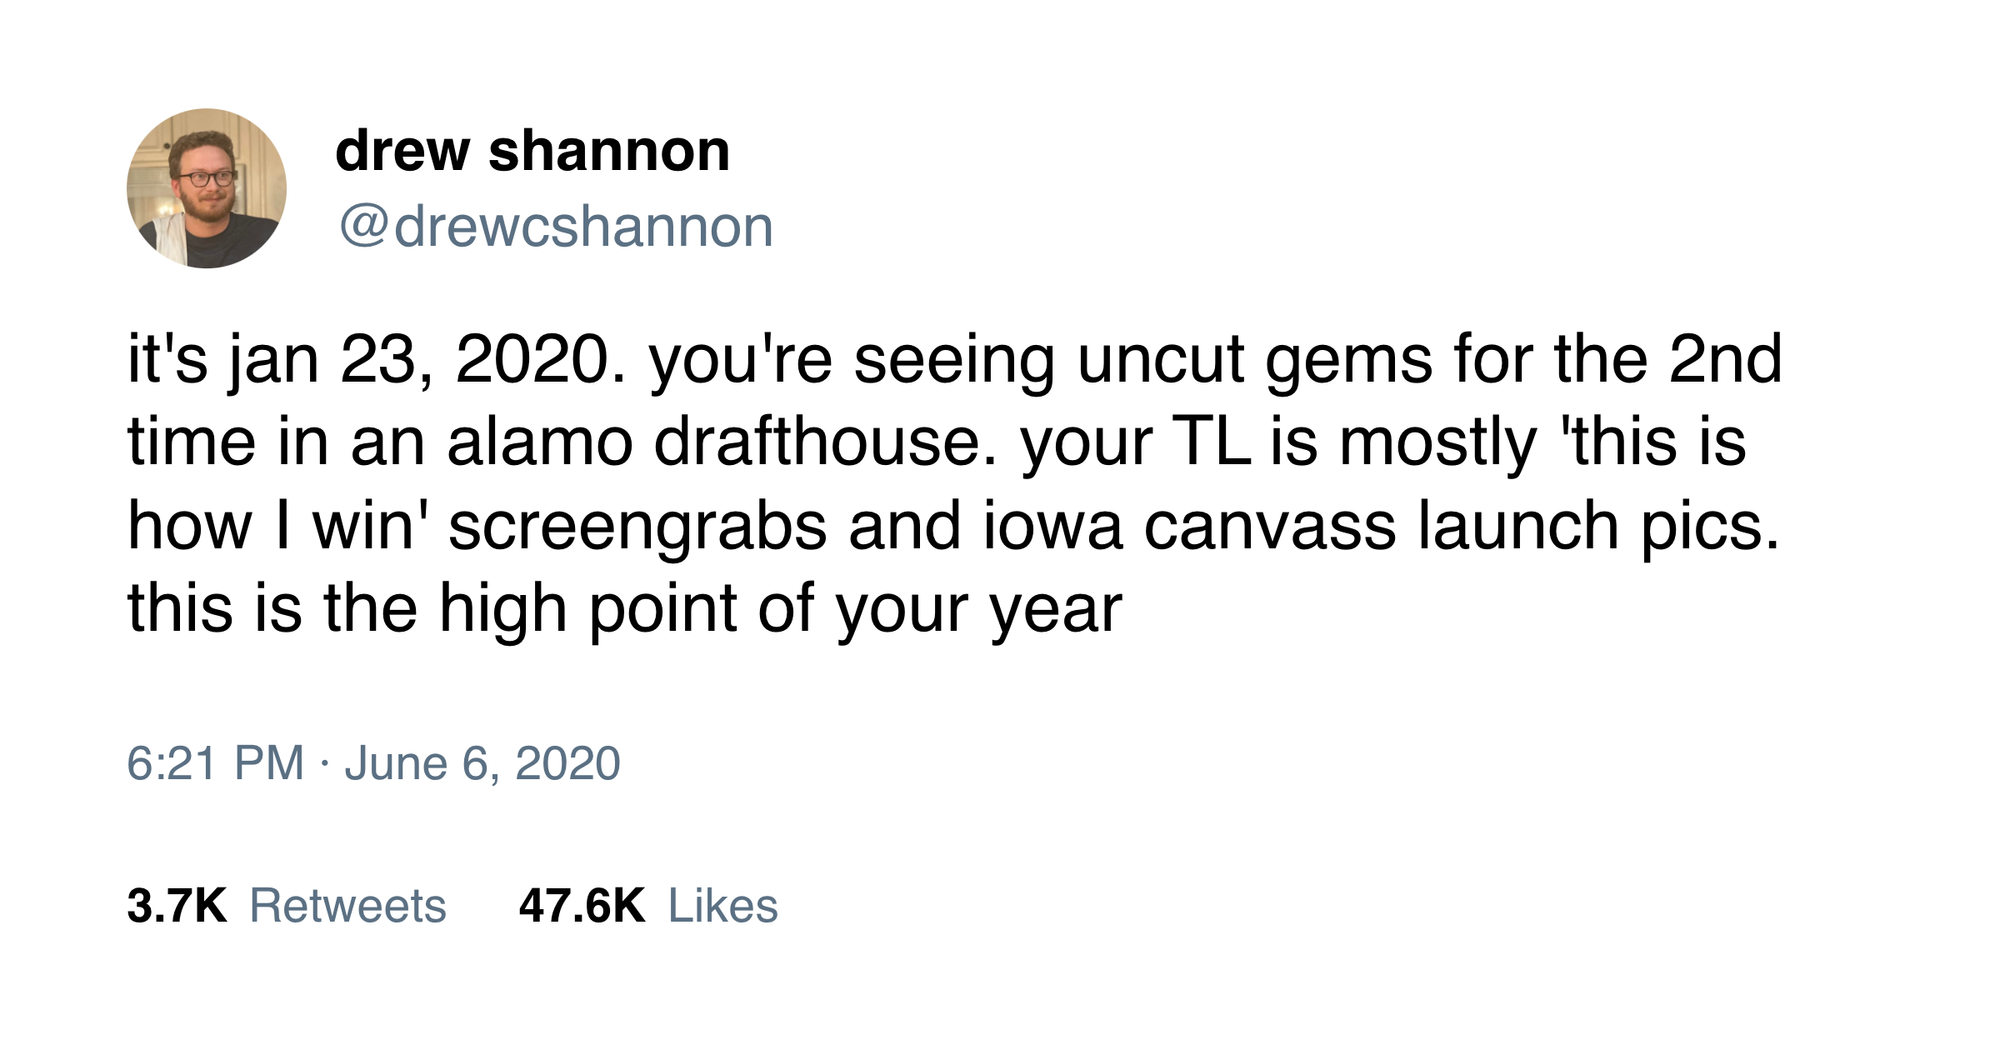 @drewcshannon on Twitter: "it's jan 23, 2020. you're seeing uncut gems for the 2nd time in an alamo drafthouse. your TL is mostly 'this is how I win' screengrabs and iowa canvass launch pics. this is the high point of your year"